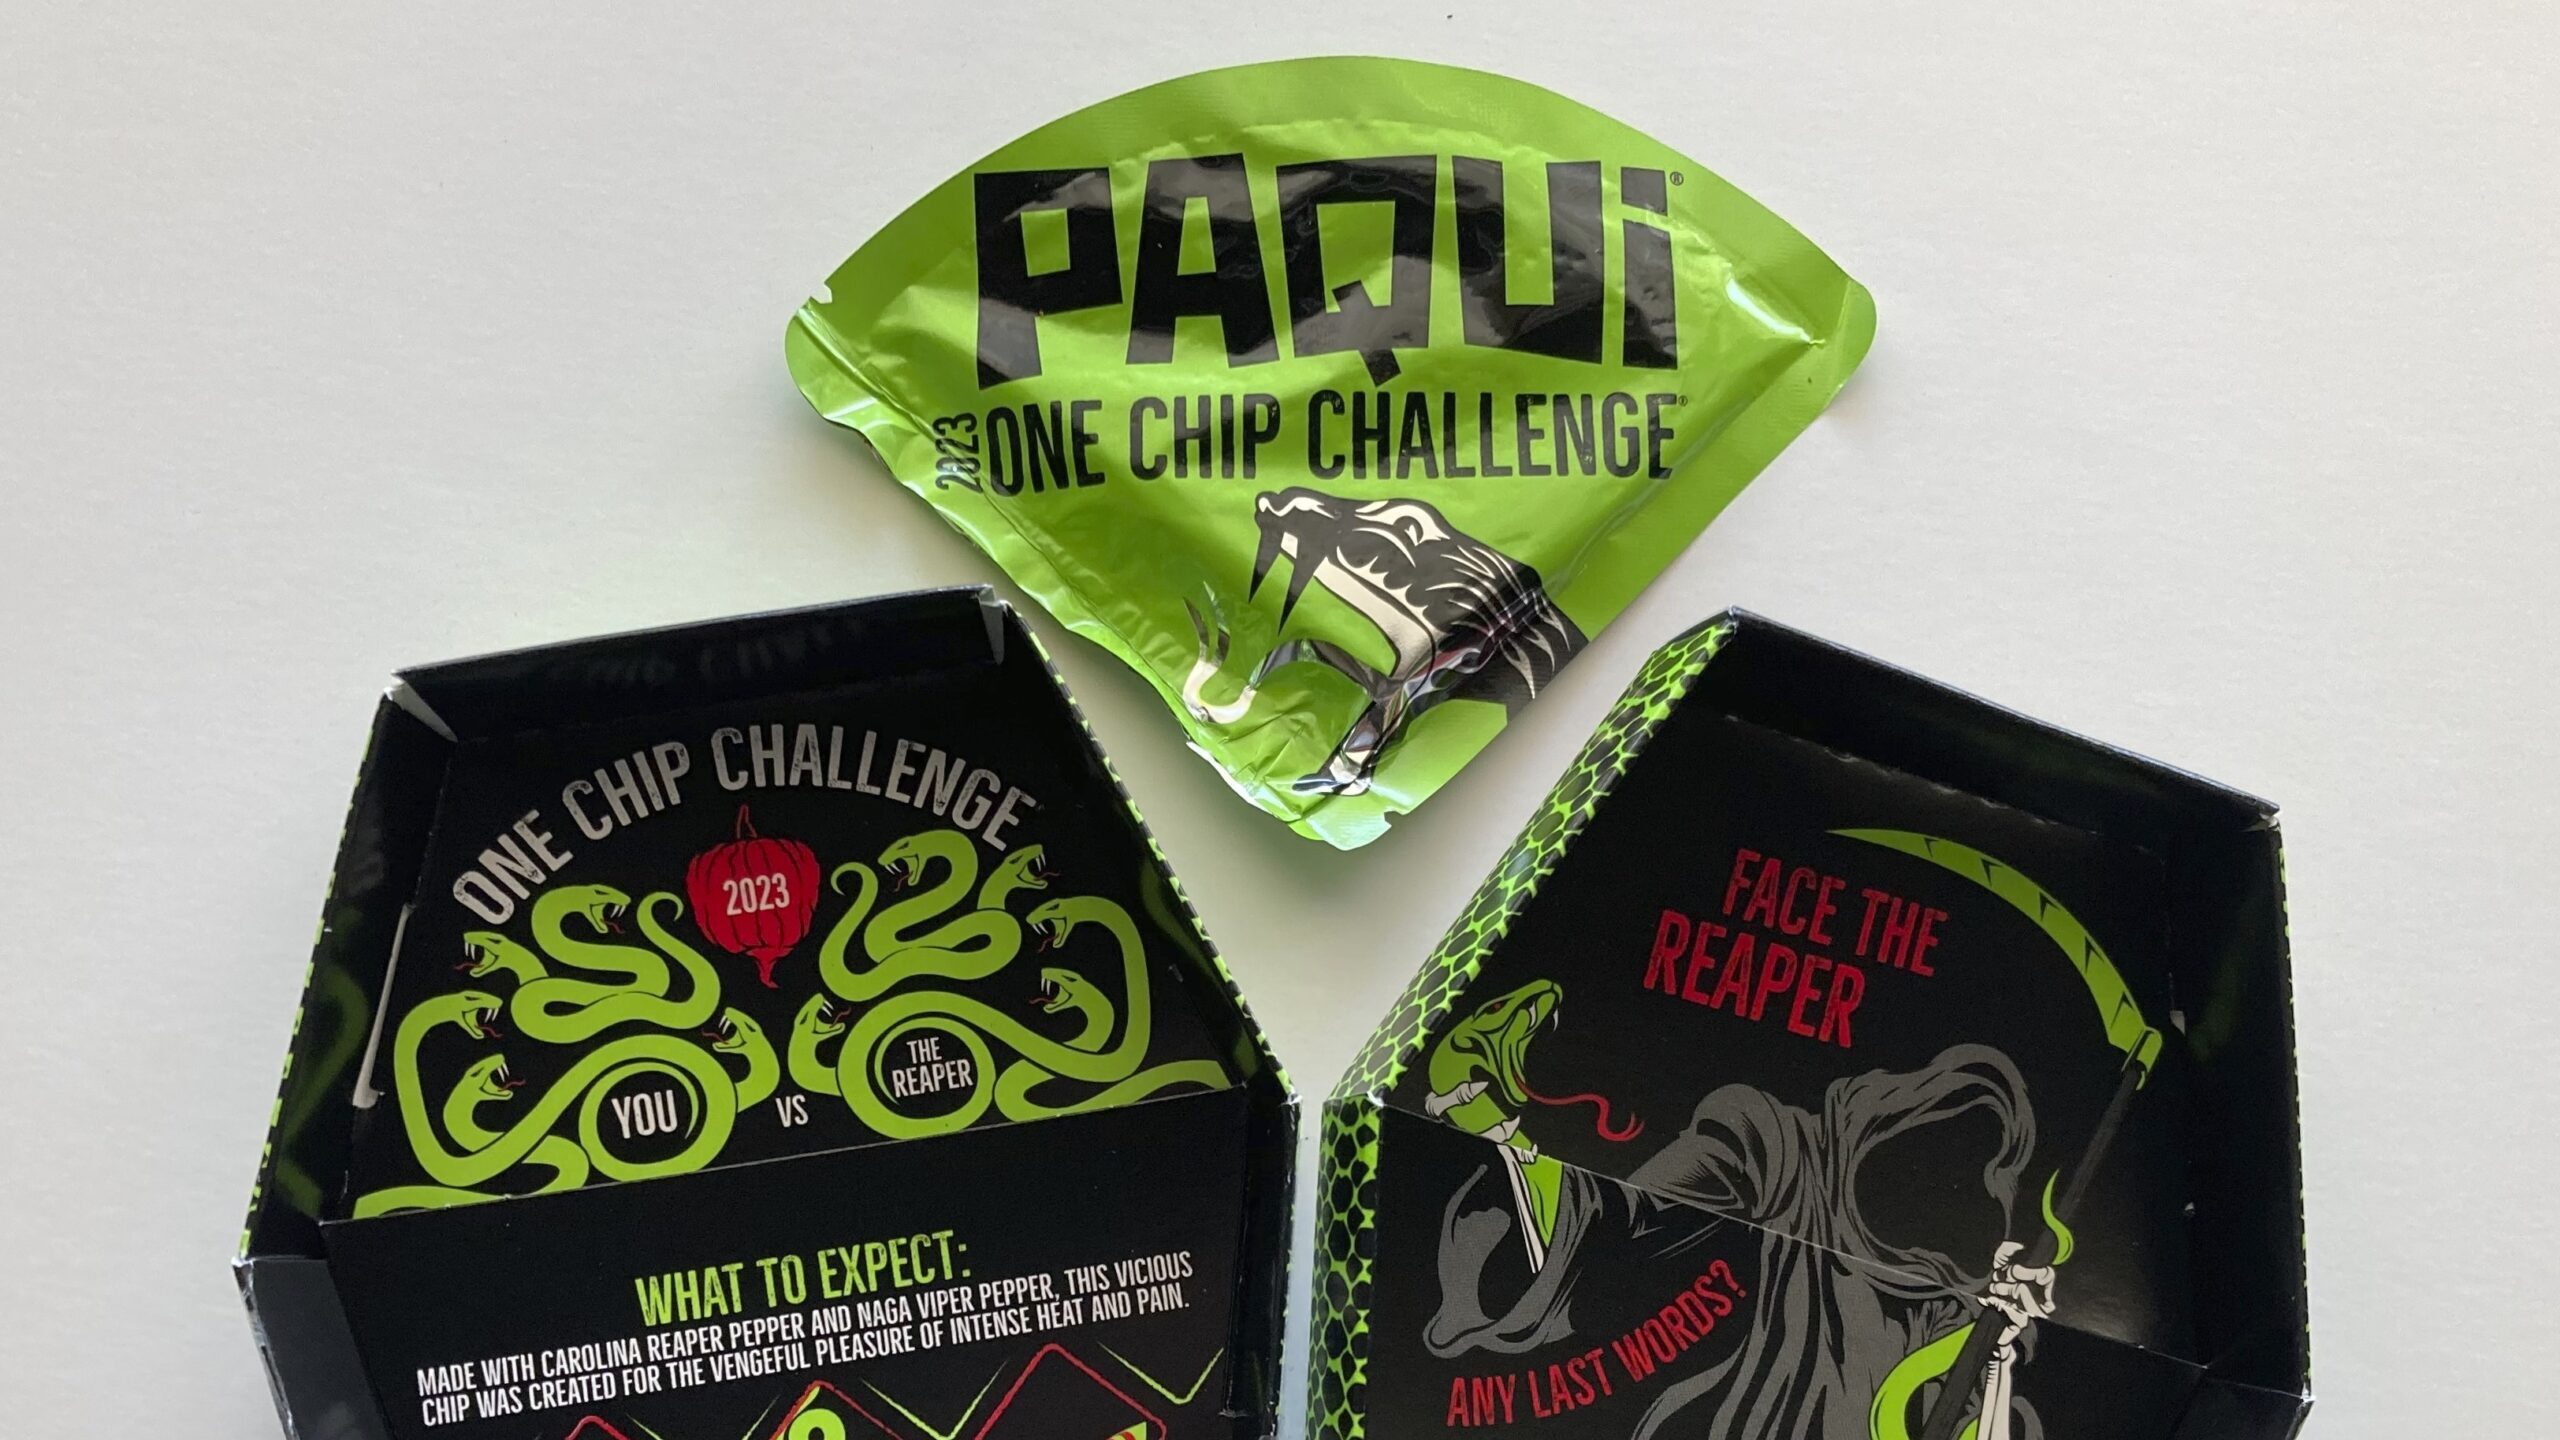 Image of a package of Paqui OneChipChallenge spicy tortilla chips, which has been pulled rom shelve...